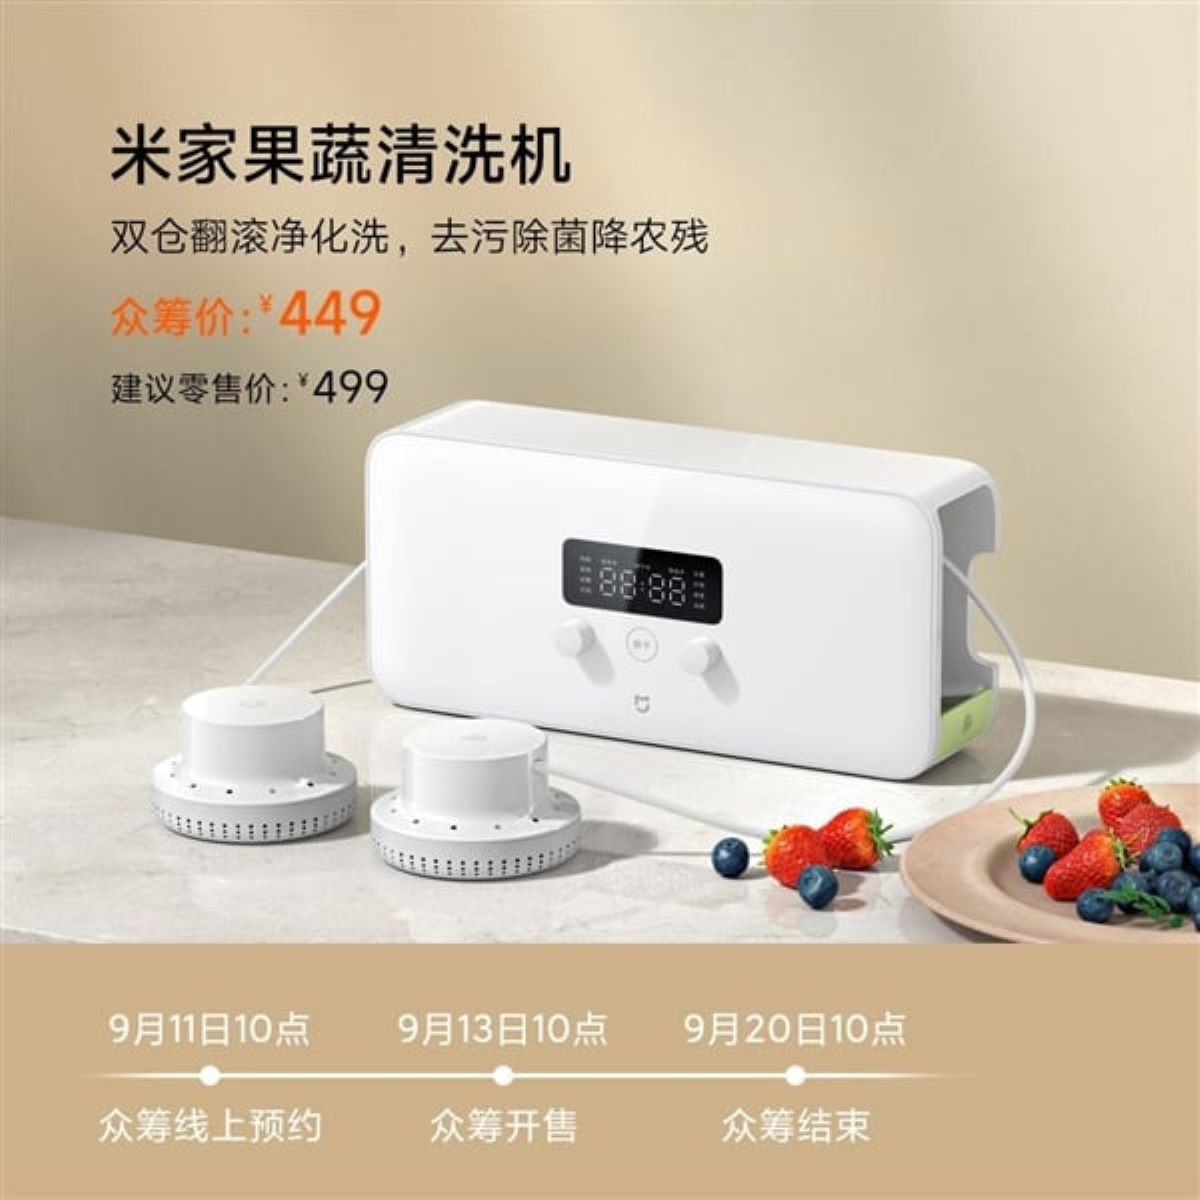 Mijia Fruit and Vegetable Cleaning Machine характеристики